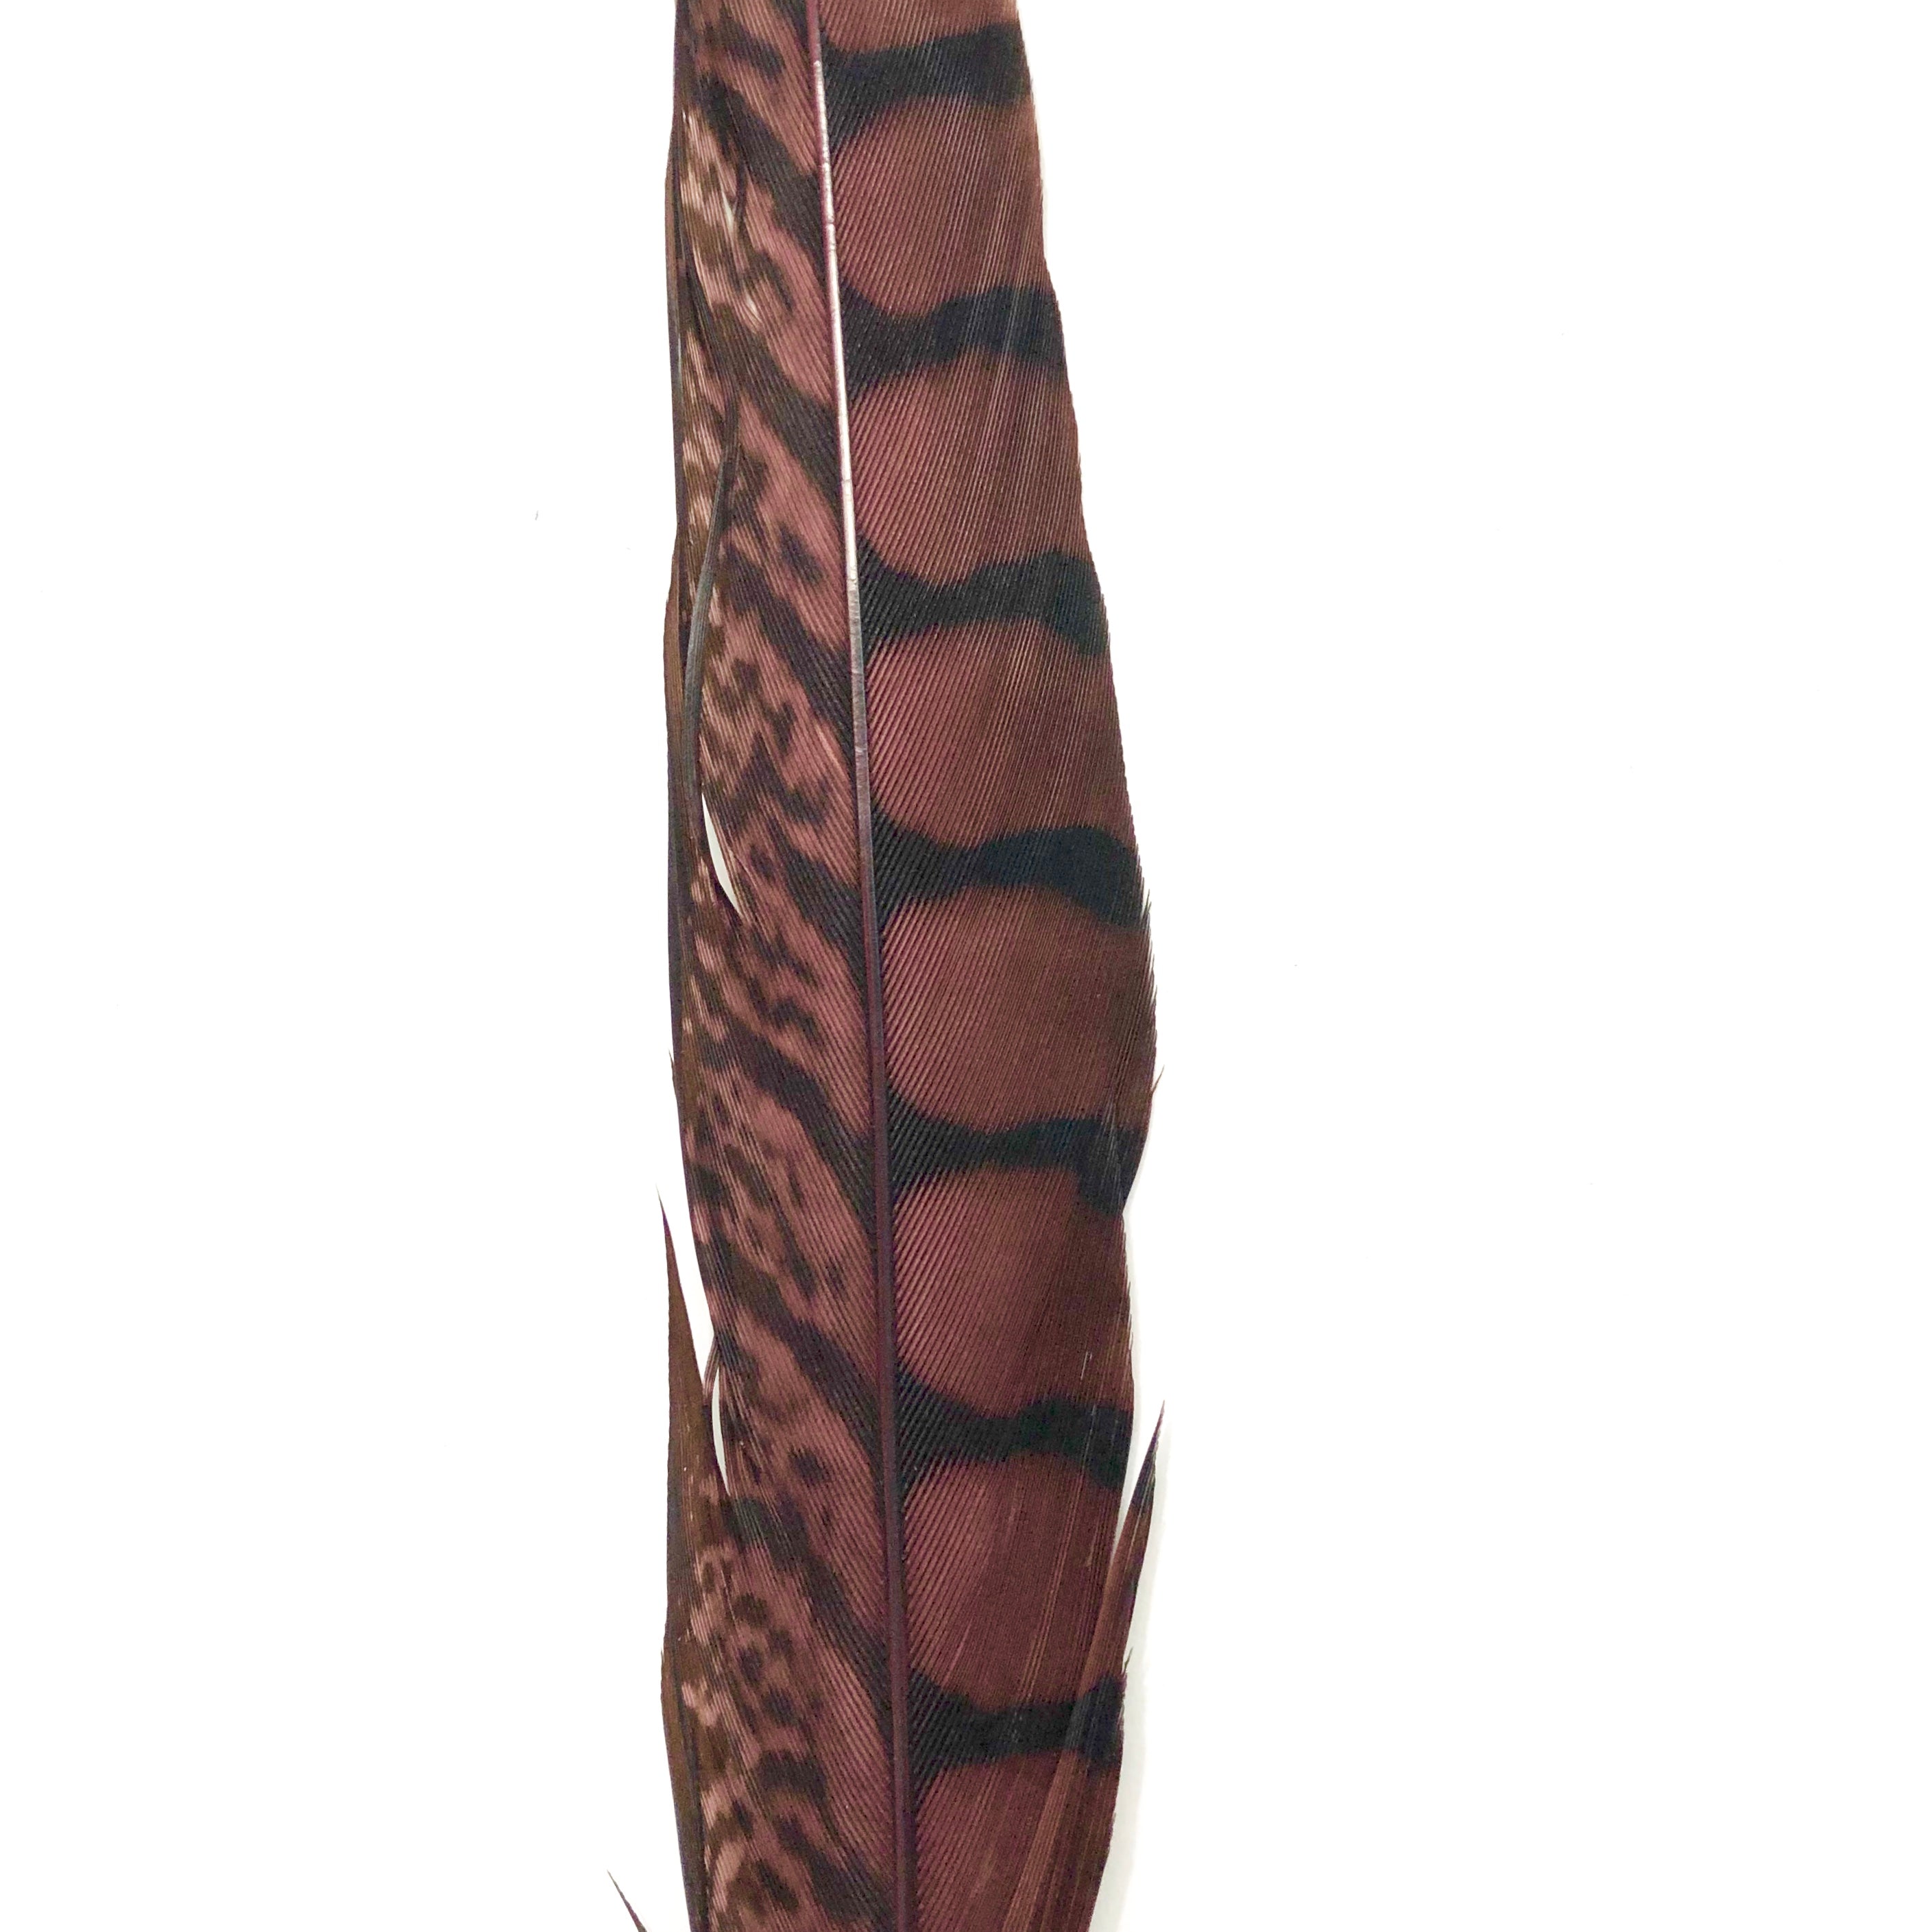 10" to 20" Lady Amherst Pheasant Side Tail Feather - Chocolate Brown